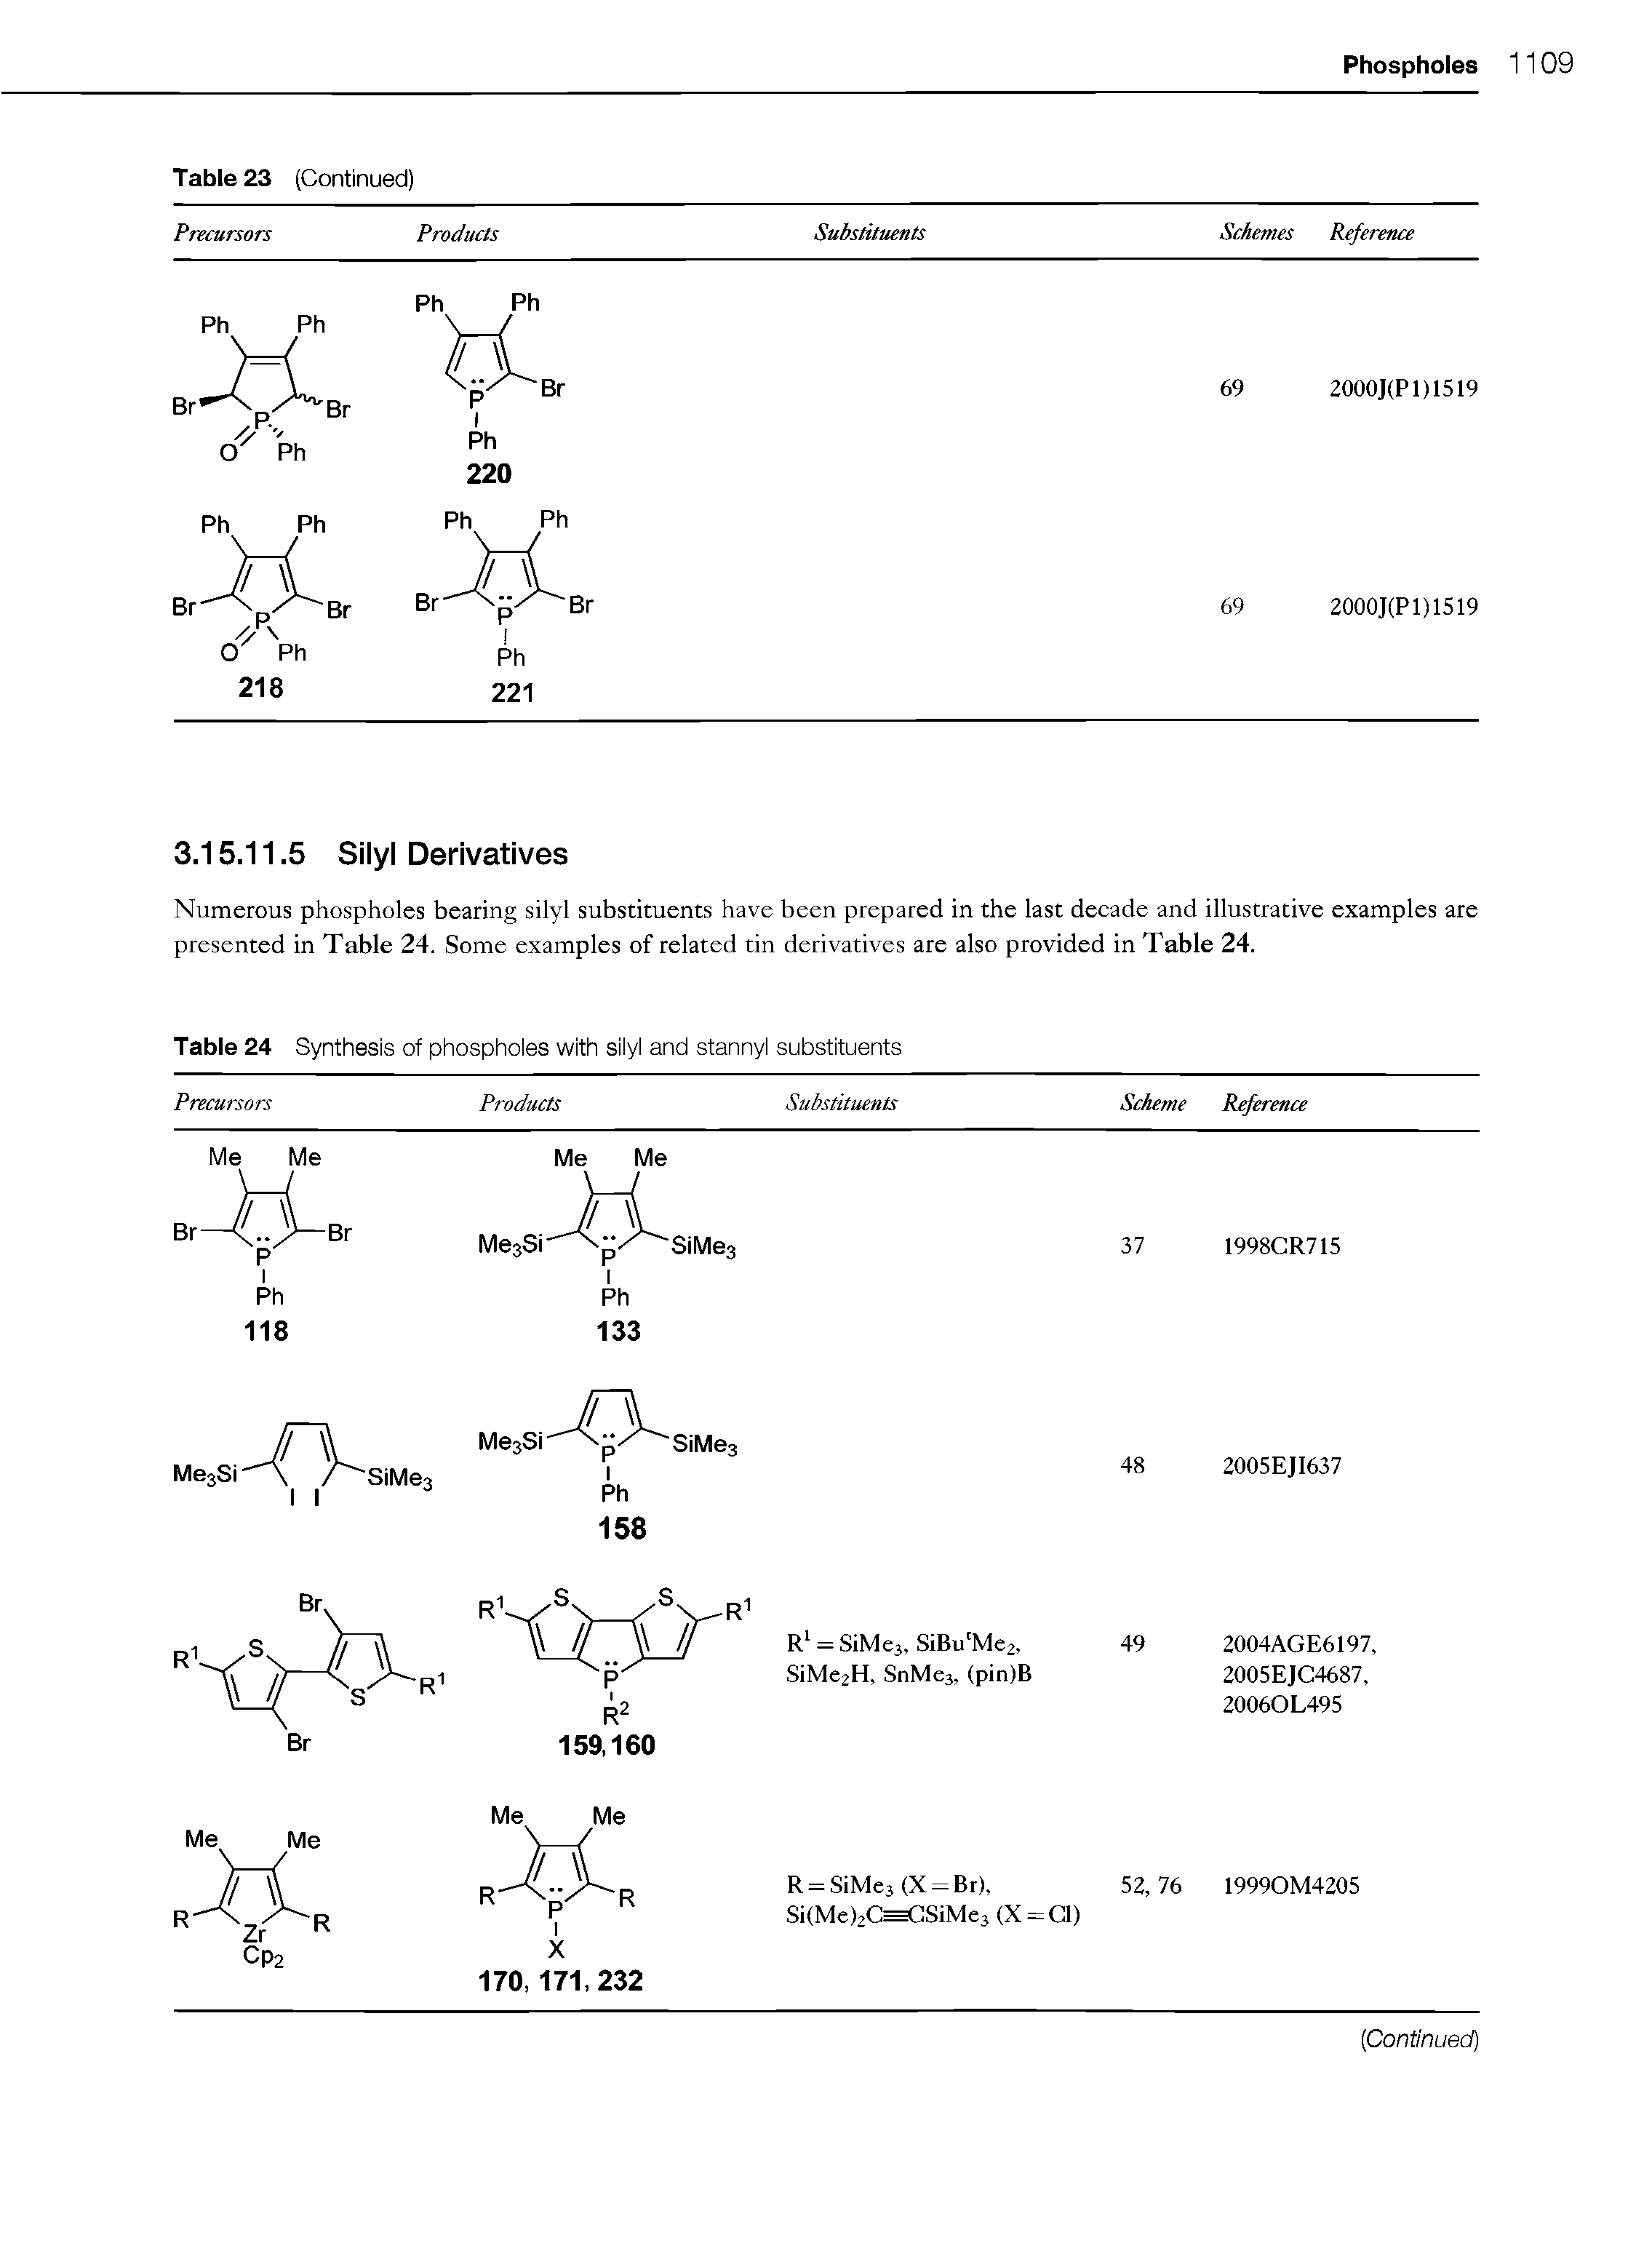 Table 24 Synthesis of phospholes with silyl and stannyl substituents...